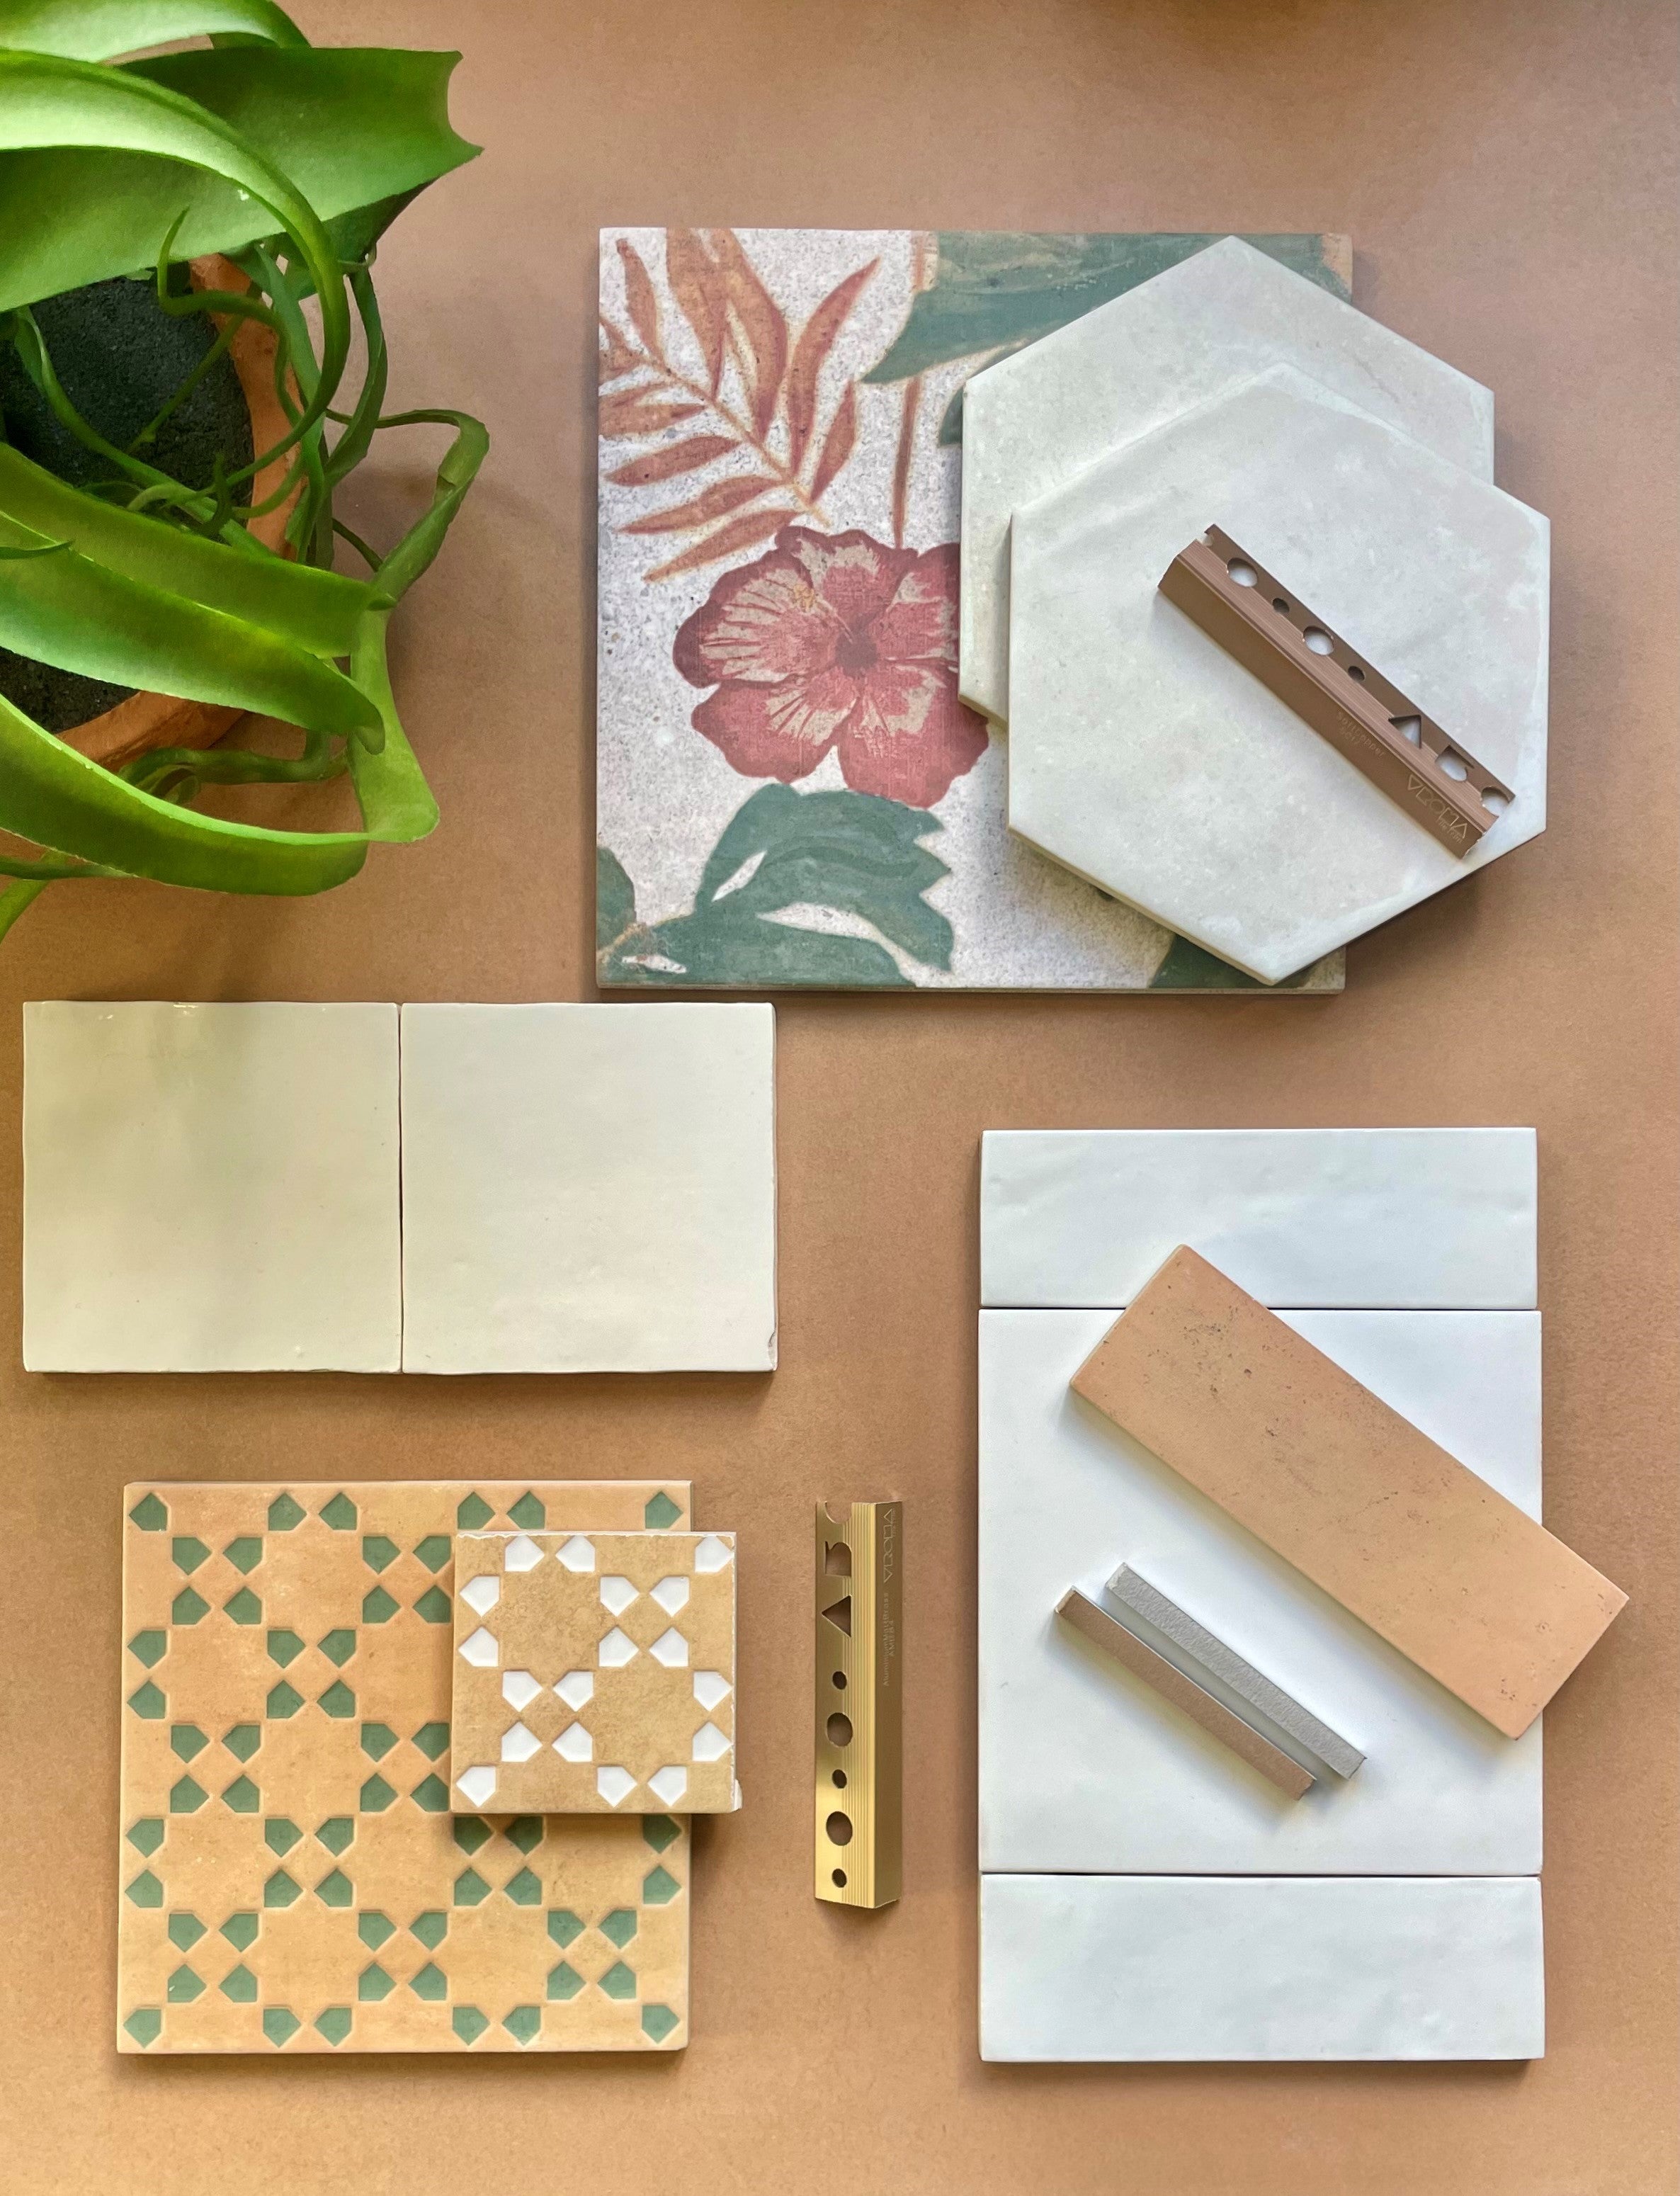 How to Choose Tiles - Lesley Taylor gives her Interior Design Advice on Choosing Tiles for your Home